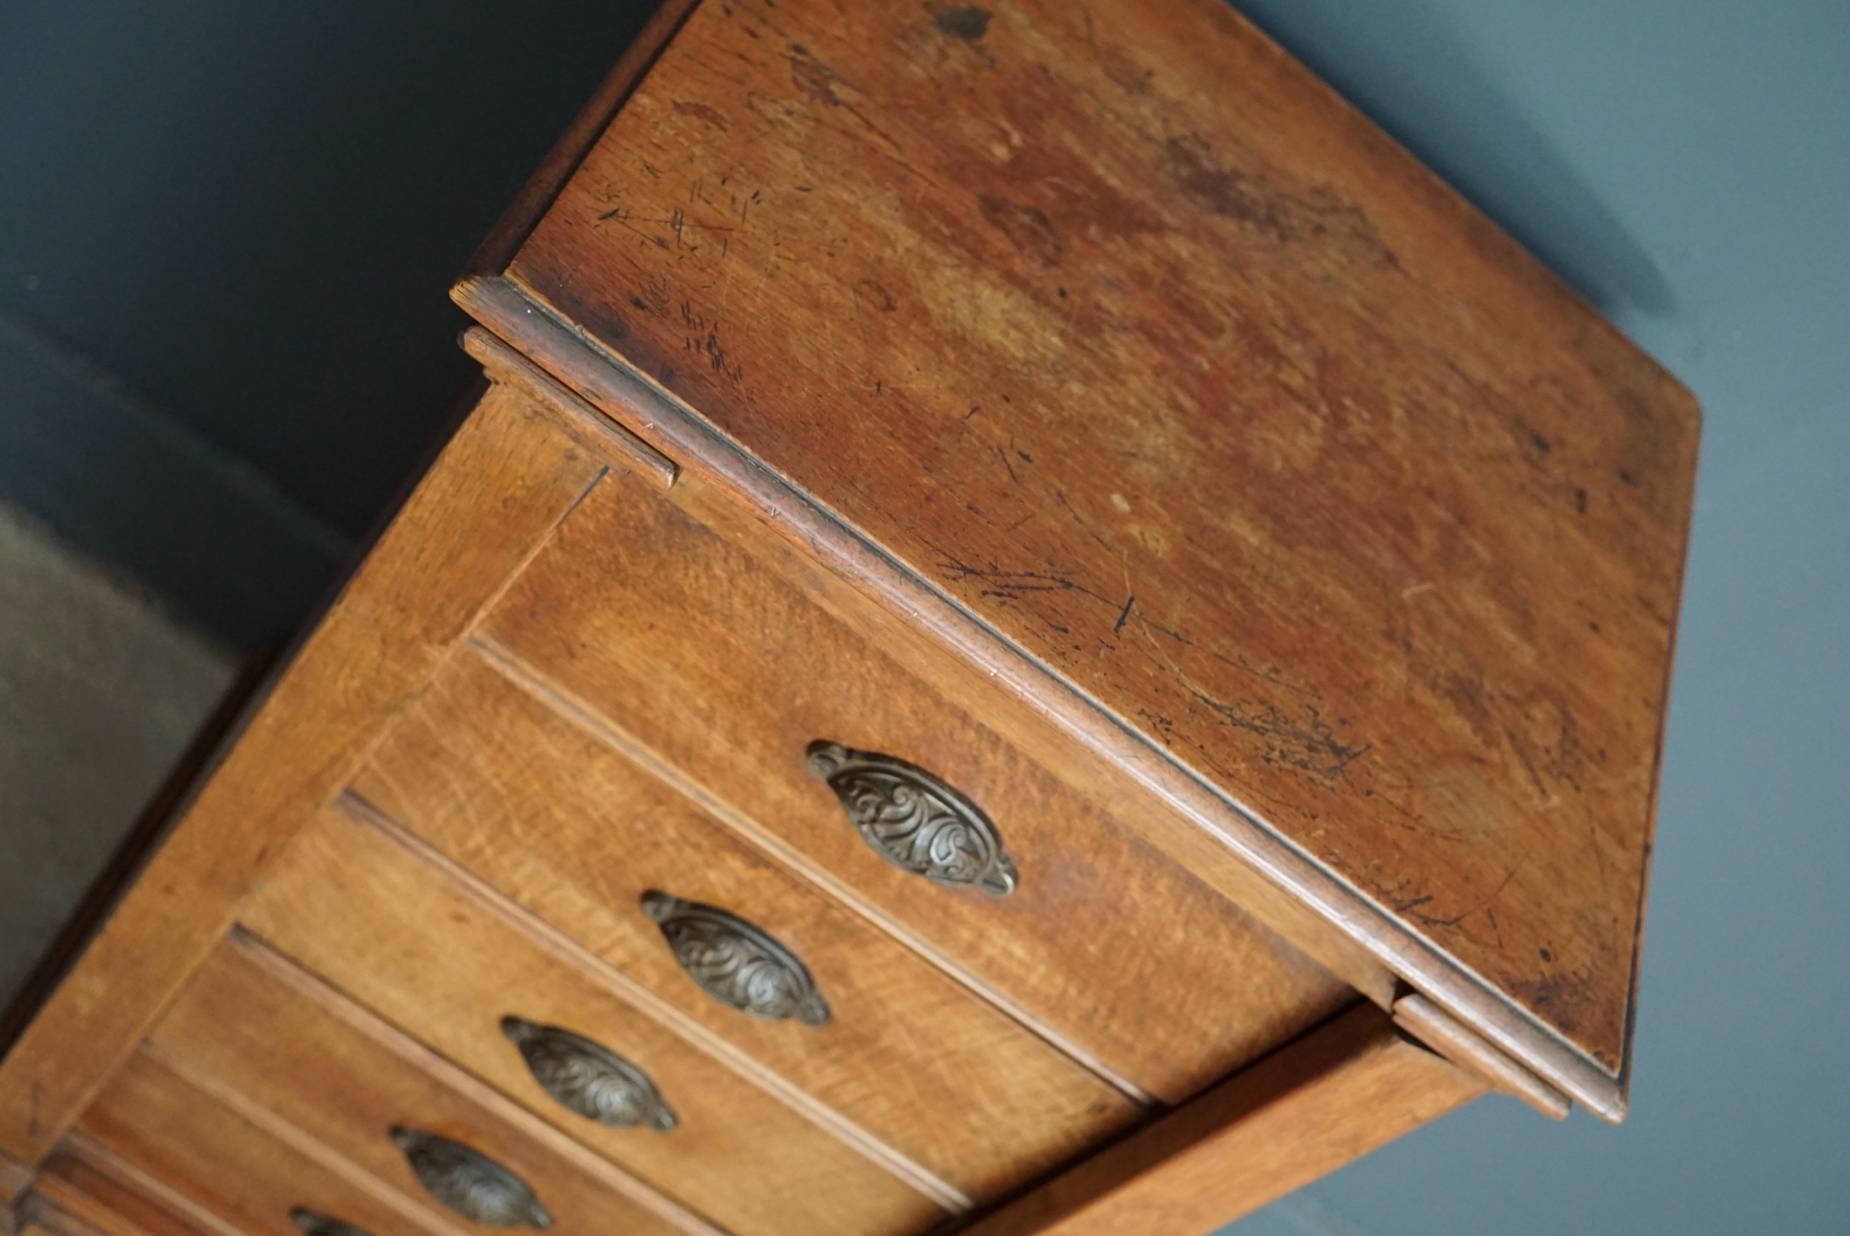 This apothecary bank of drawers was designed and made circa 1920s in France. The piece is made from beechwood and features drawers with cast iron cup handles.